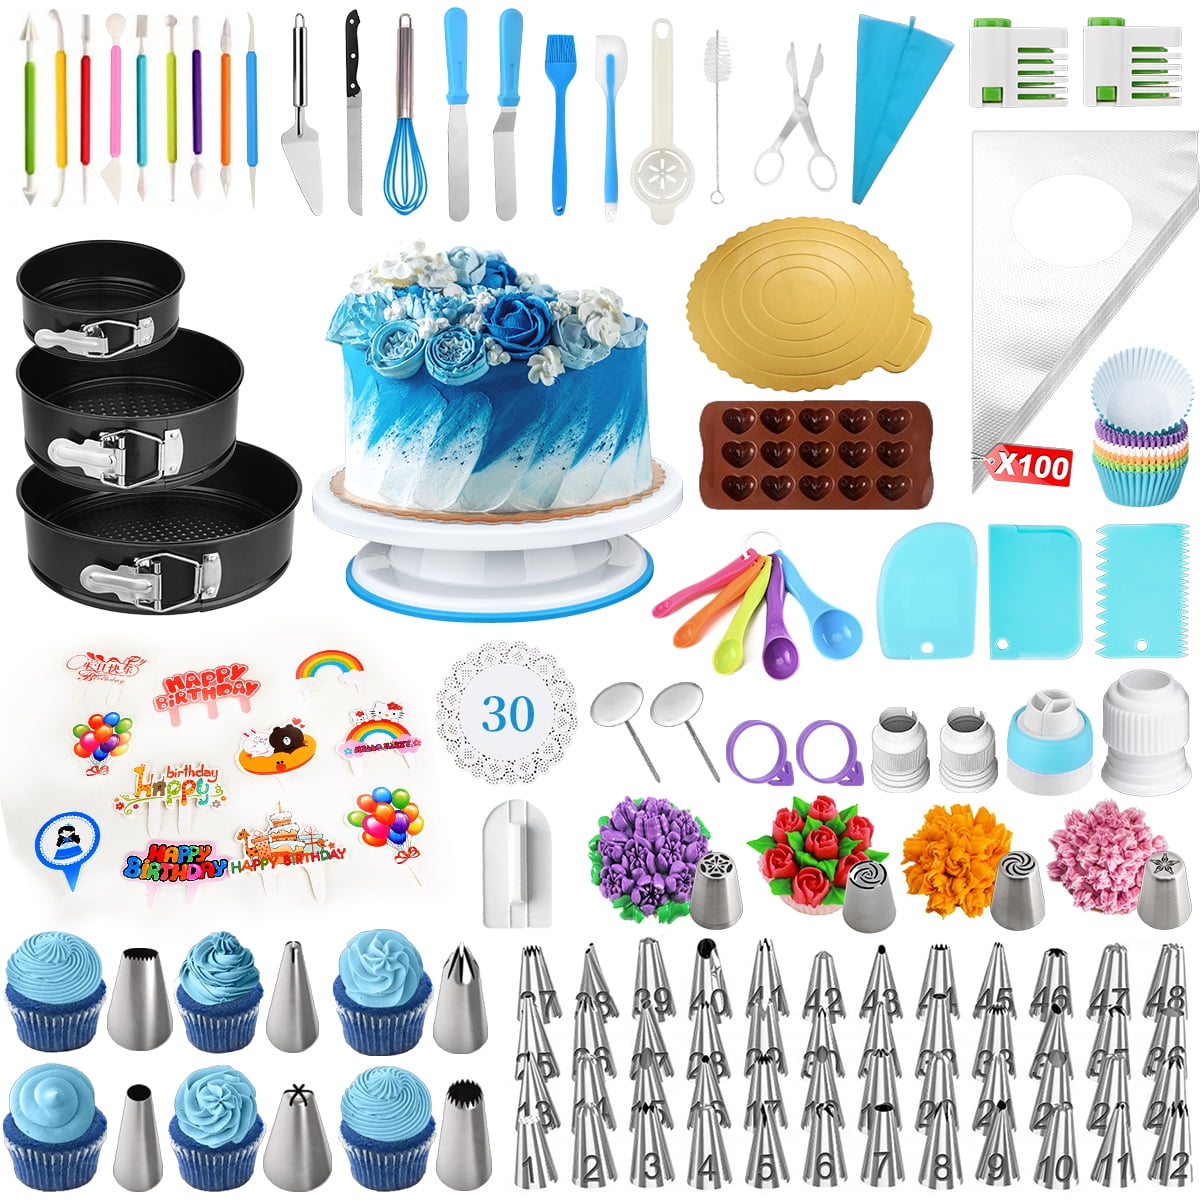 379 Pcs Cake Decorating Supplies Kit, Baking Pastry Tools with Cake Rotating Turntable Scraper Spatula Leveler & 48 Icing Piping Tips Pattern Chart, Supplies for Beginner and Cake-Lover -